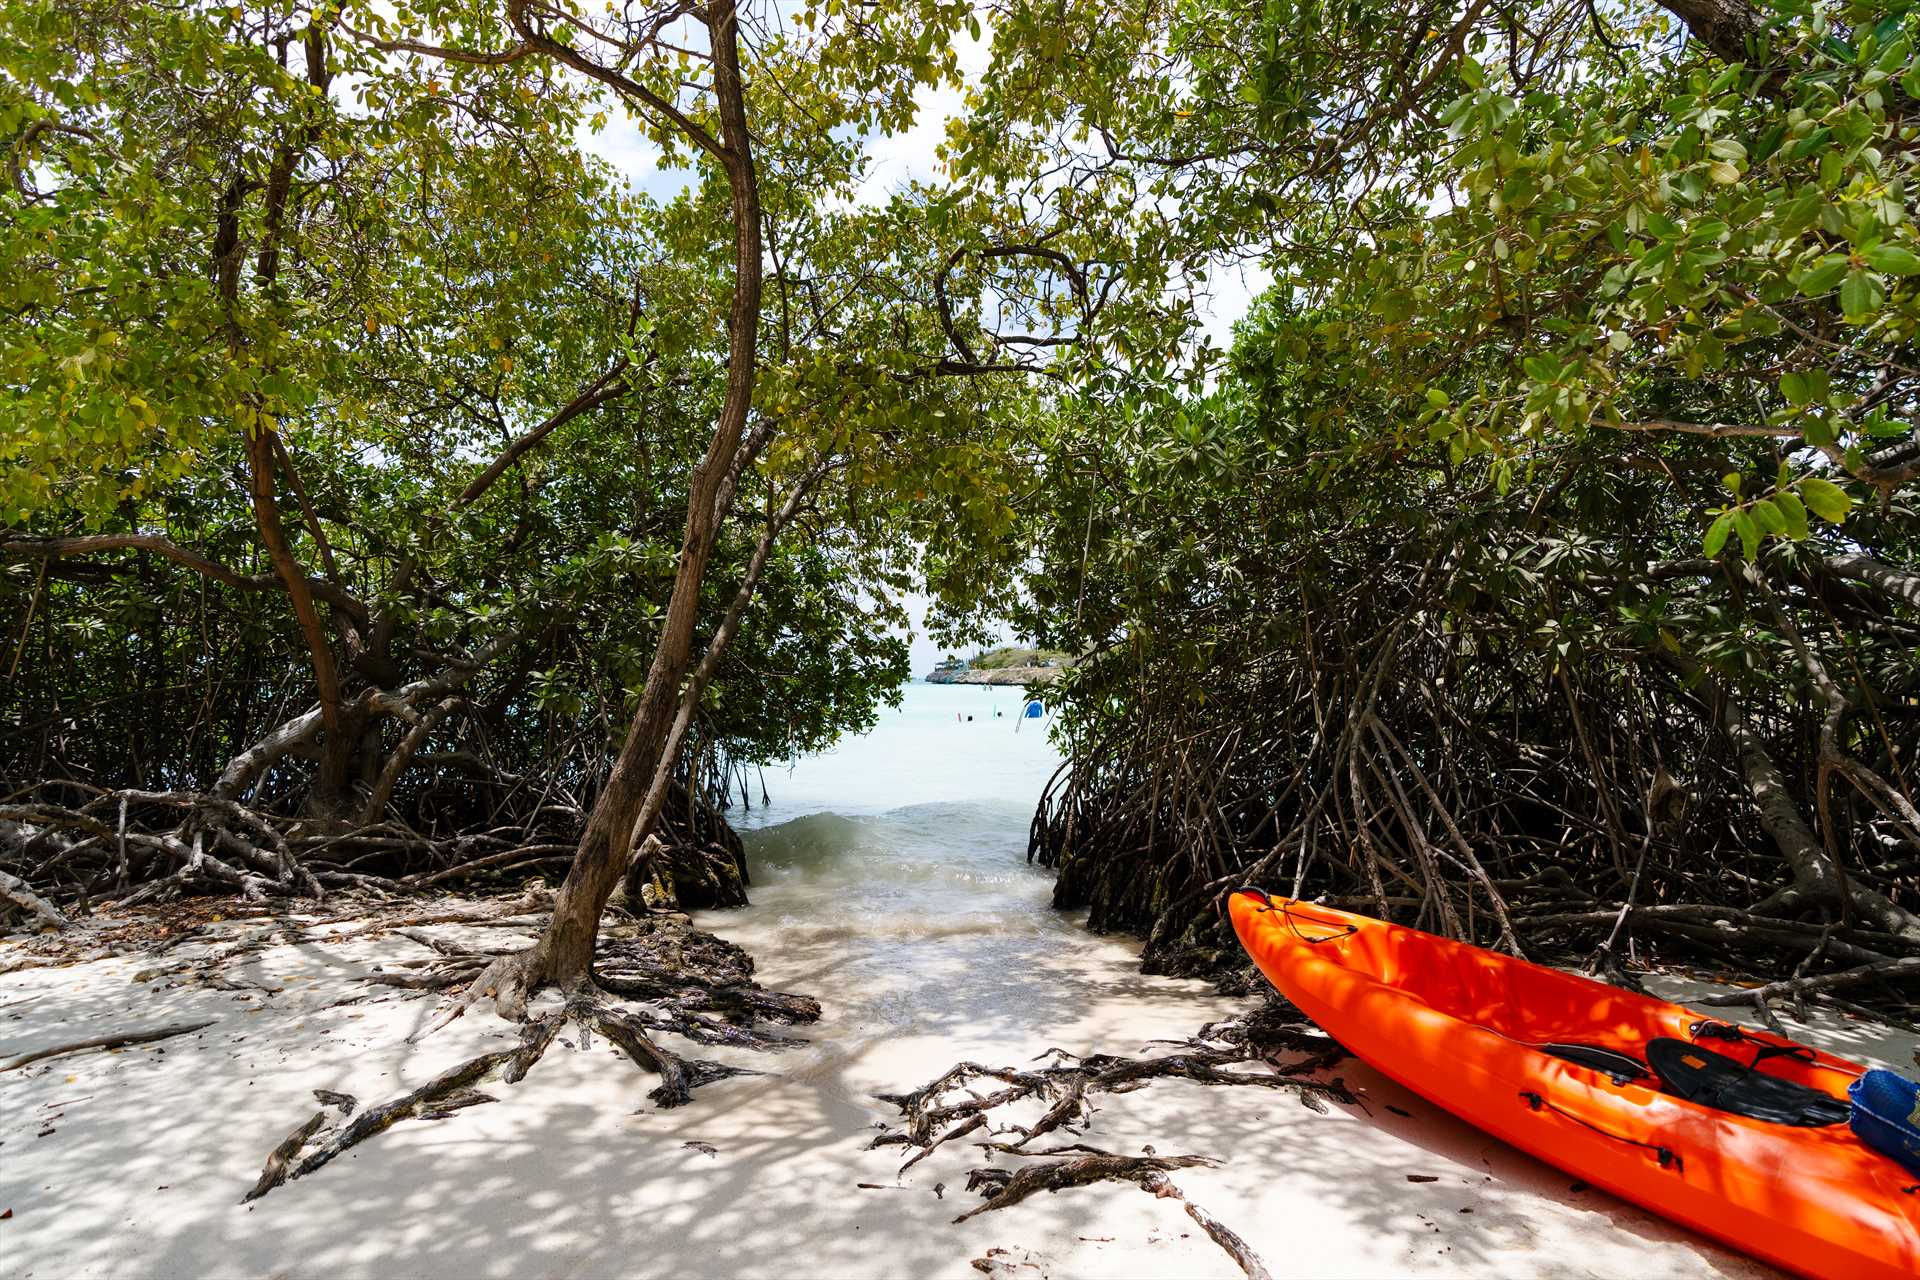 Another access to the ocean via the mangroves